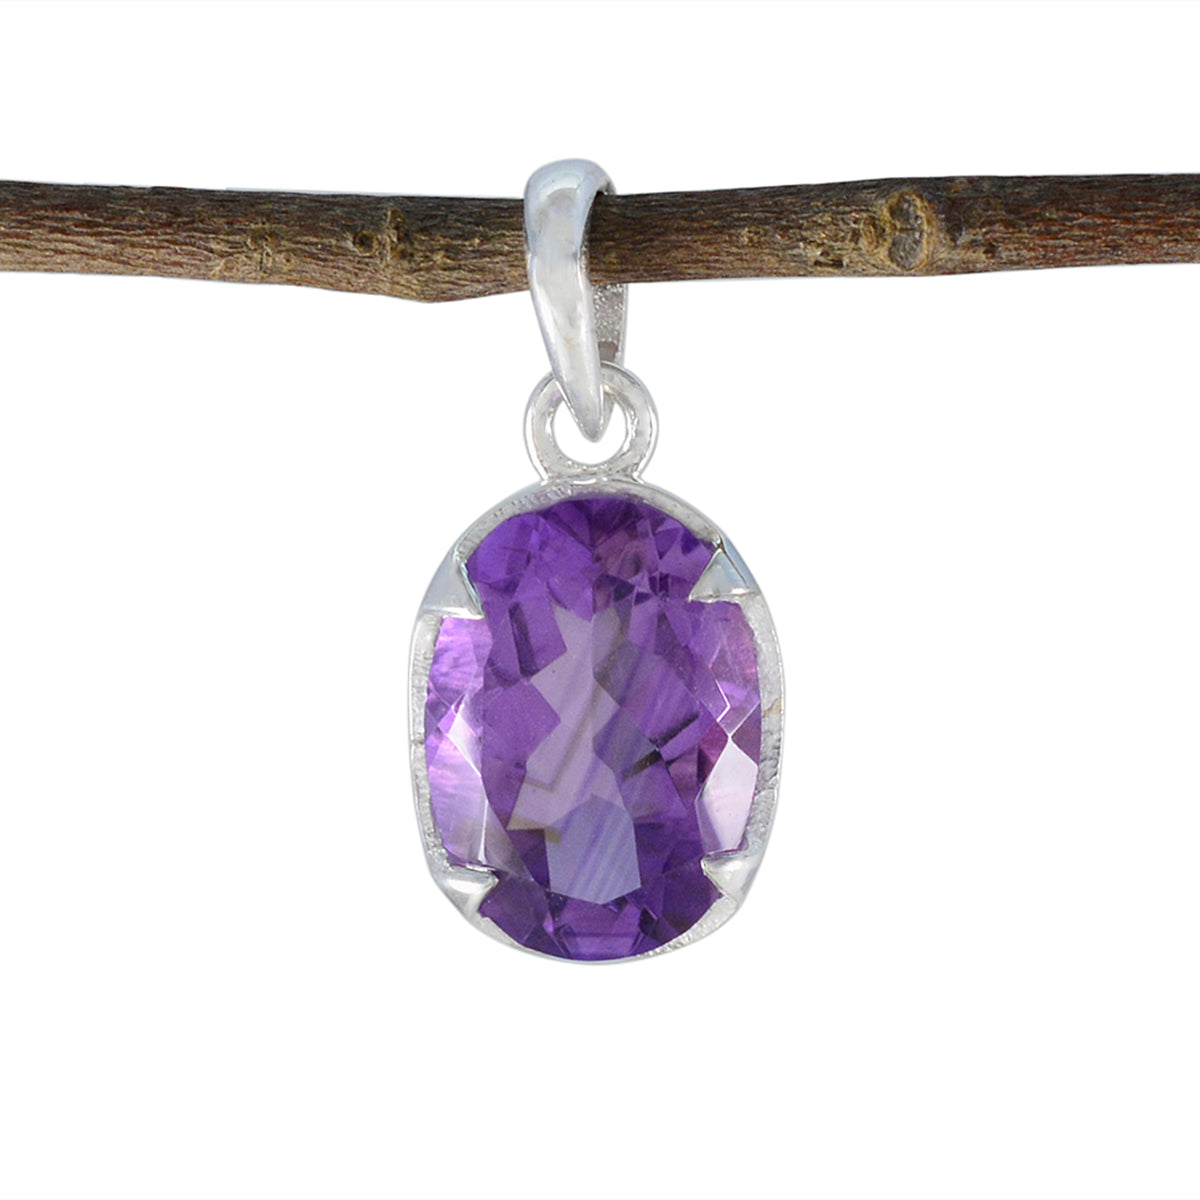 Riyo Glamorous Gemstone Oval Faceted Purple Amethyst 930 Sterling Silver Pendant Gift For Good Friday